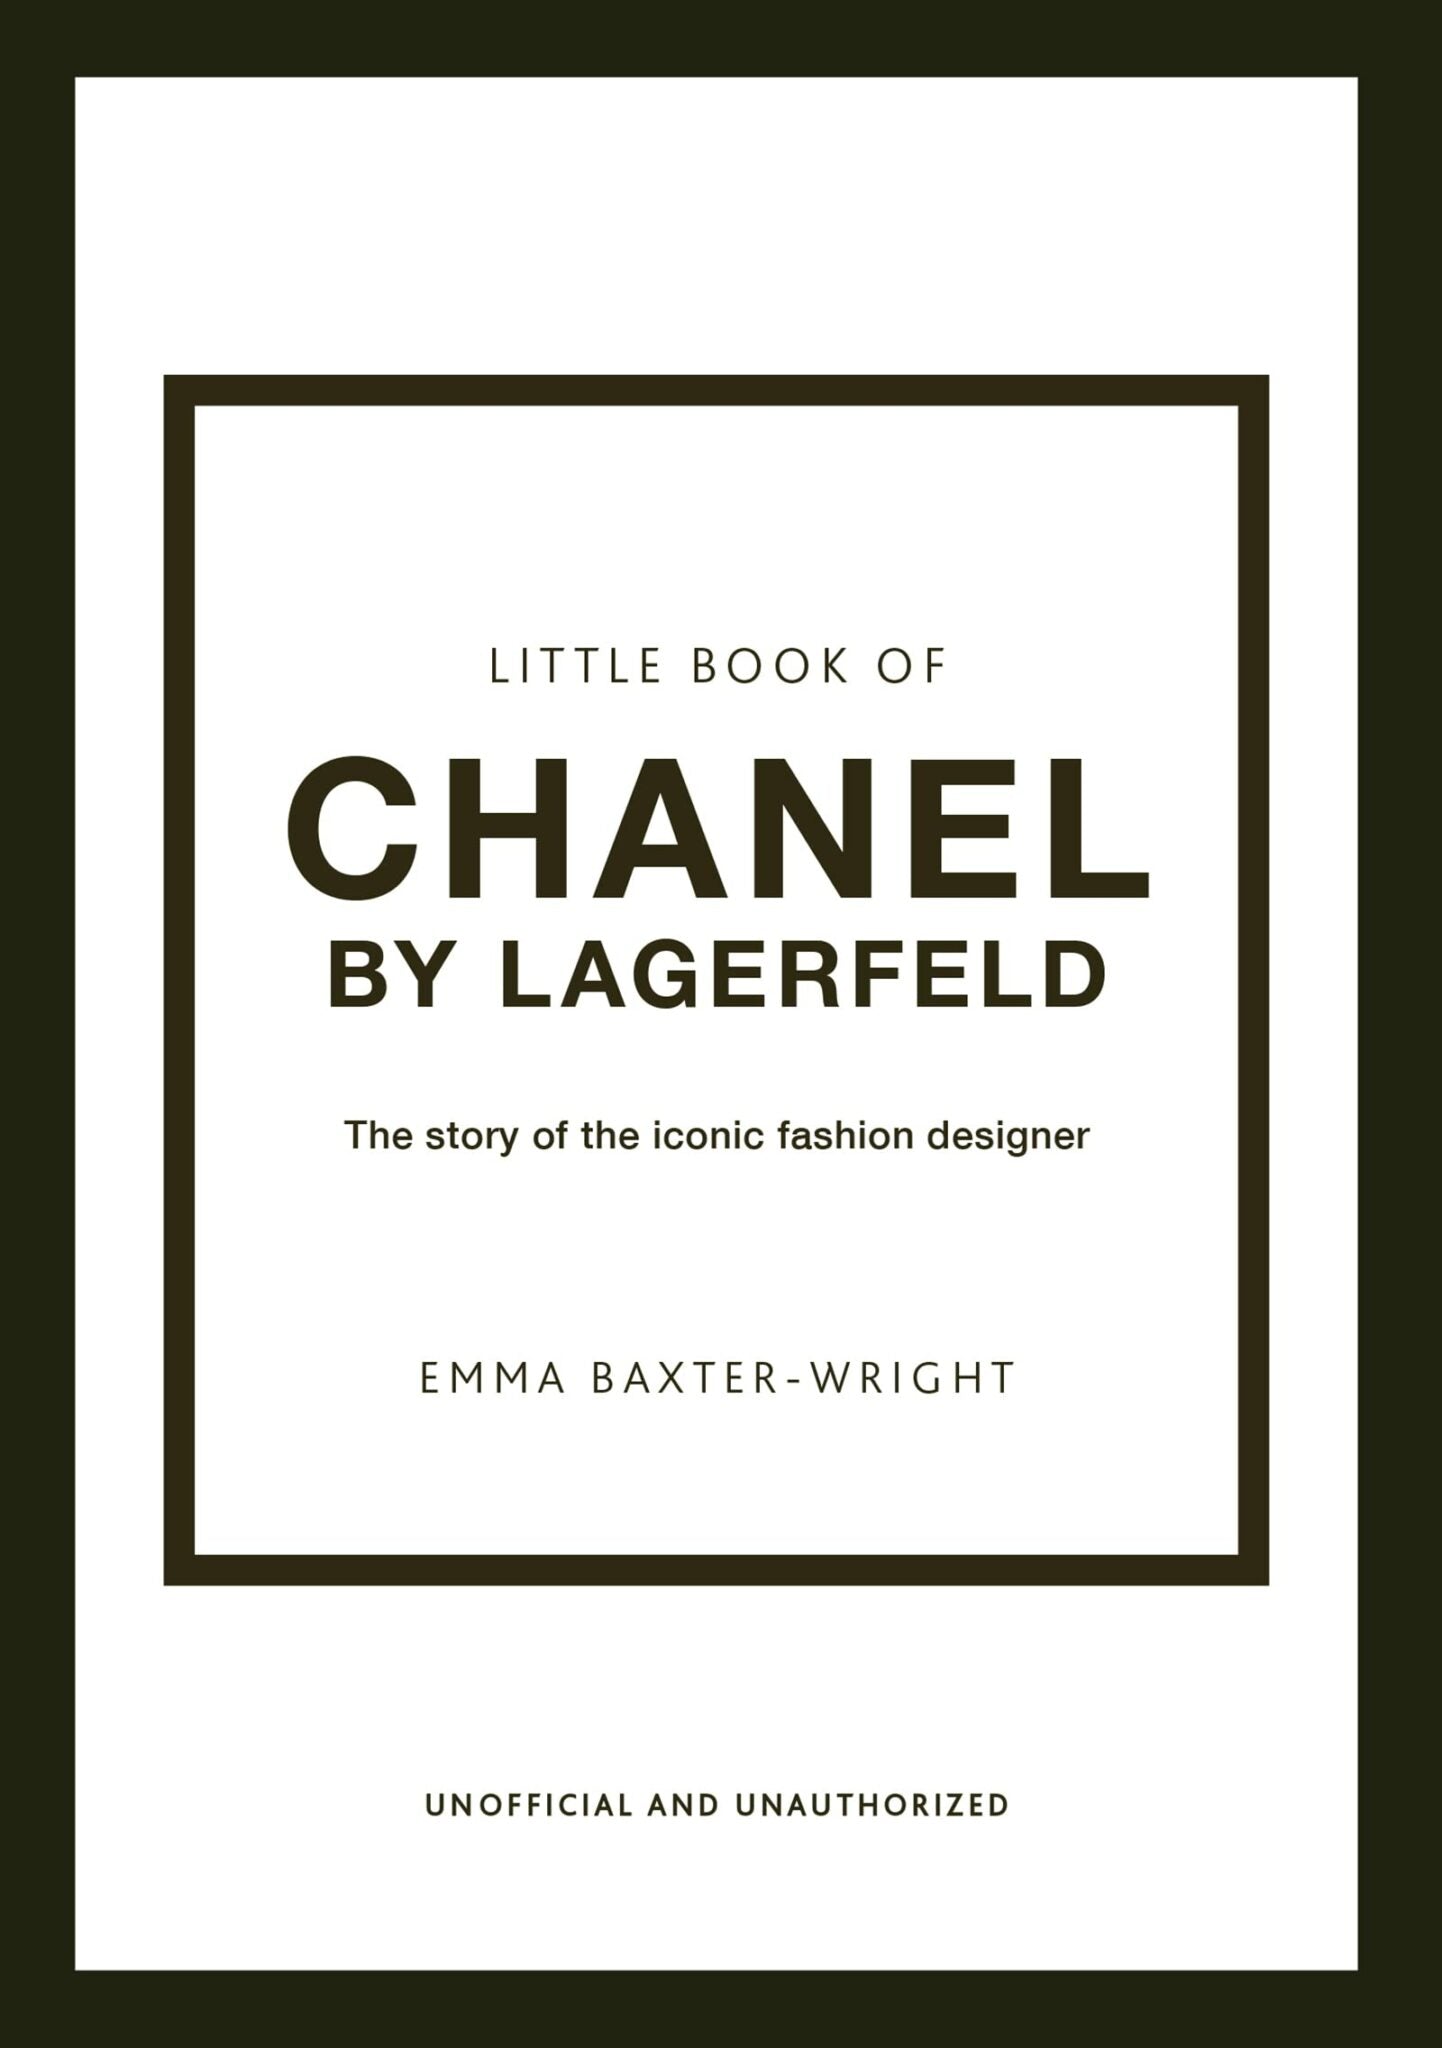 LITTLE BOOK OF CHANEL BY LAGERFELD